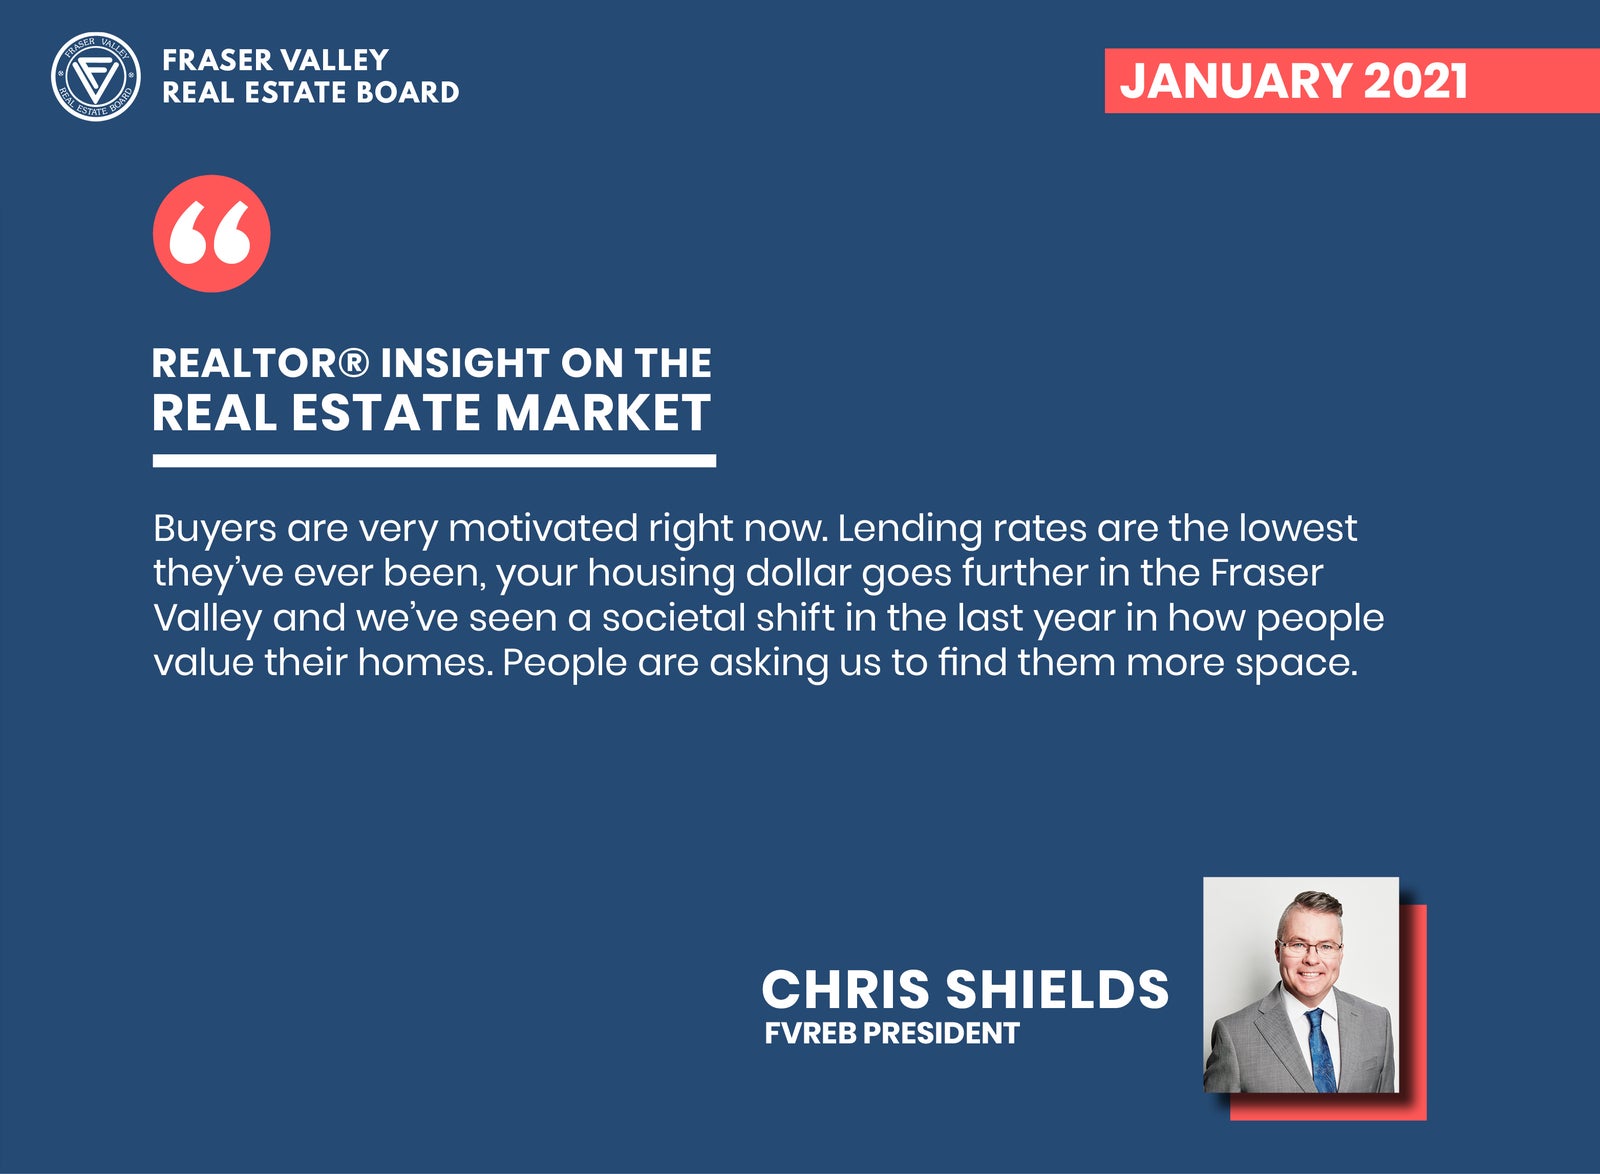 “Buyers are very motivated right now,” said Chris Shields, President of the Board